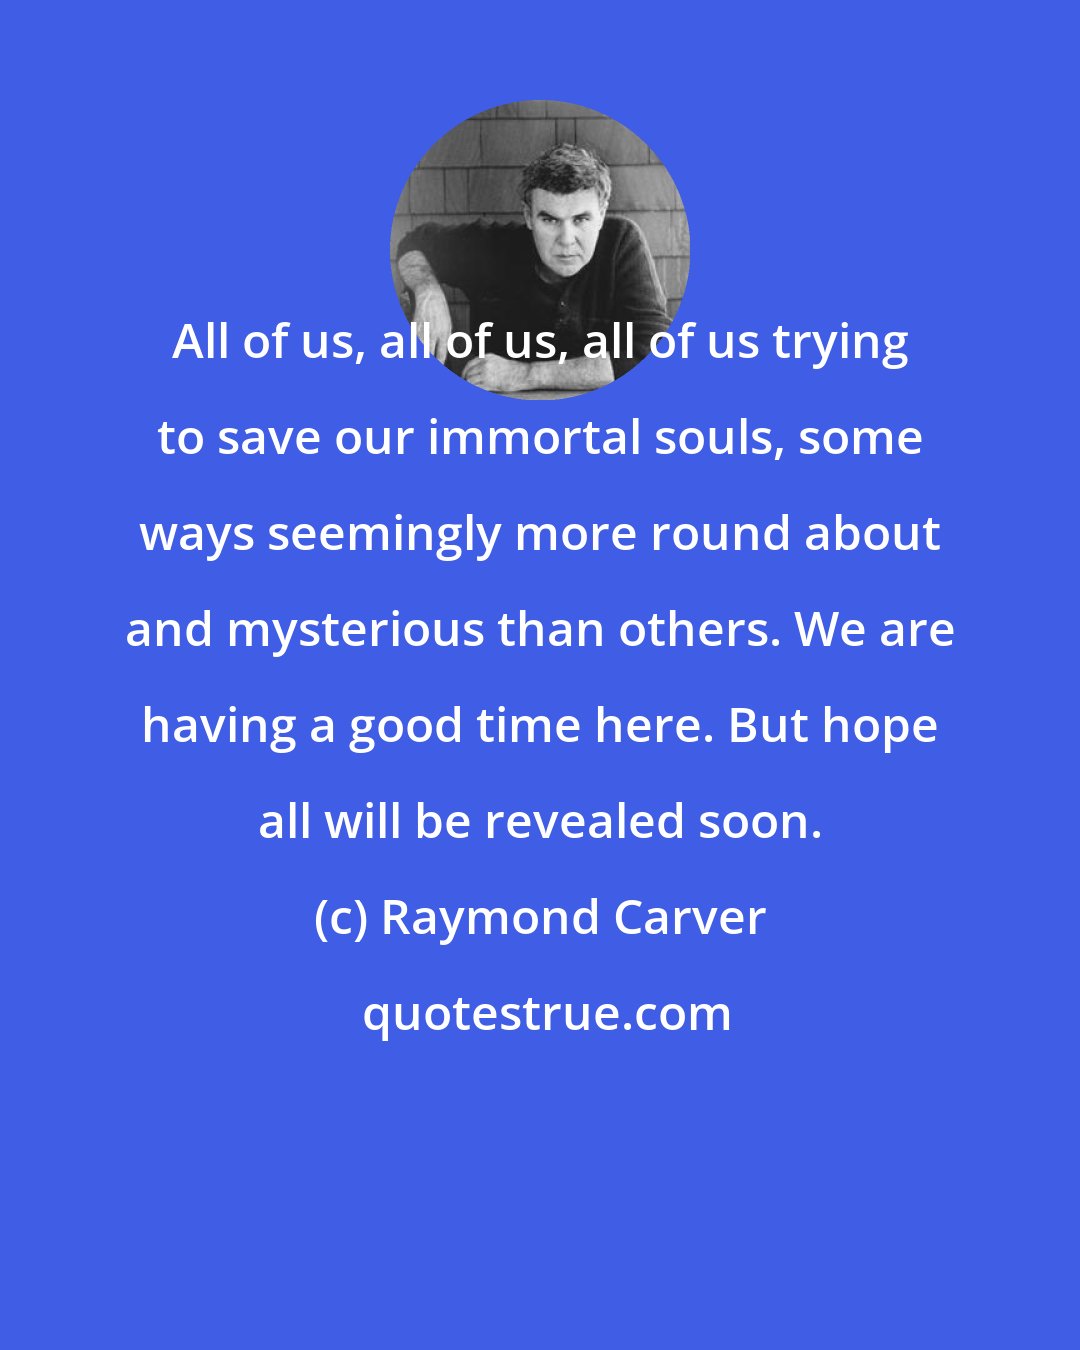 Raymond Carver: All of us, all of us, all of us trying to save our immortal souls, some ways seemingly more round about and mysterious than others. We are having a good time here. But hope all will be revealed soon.